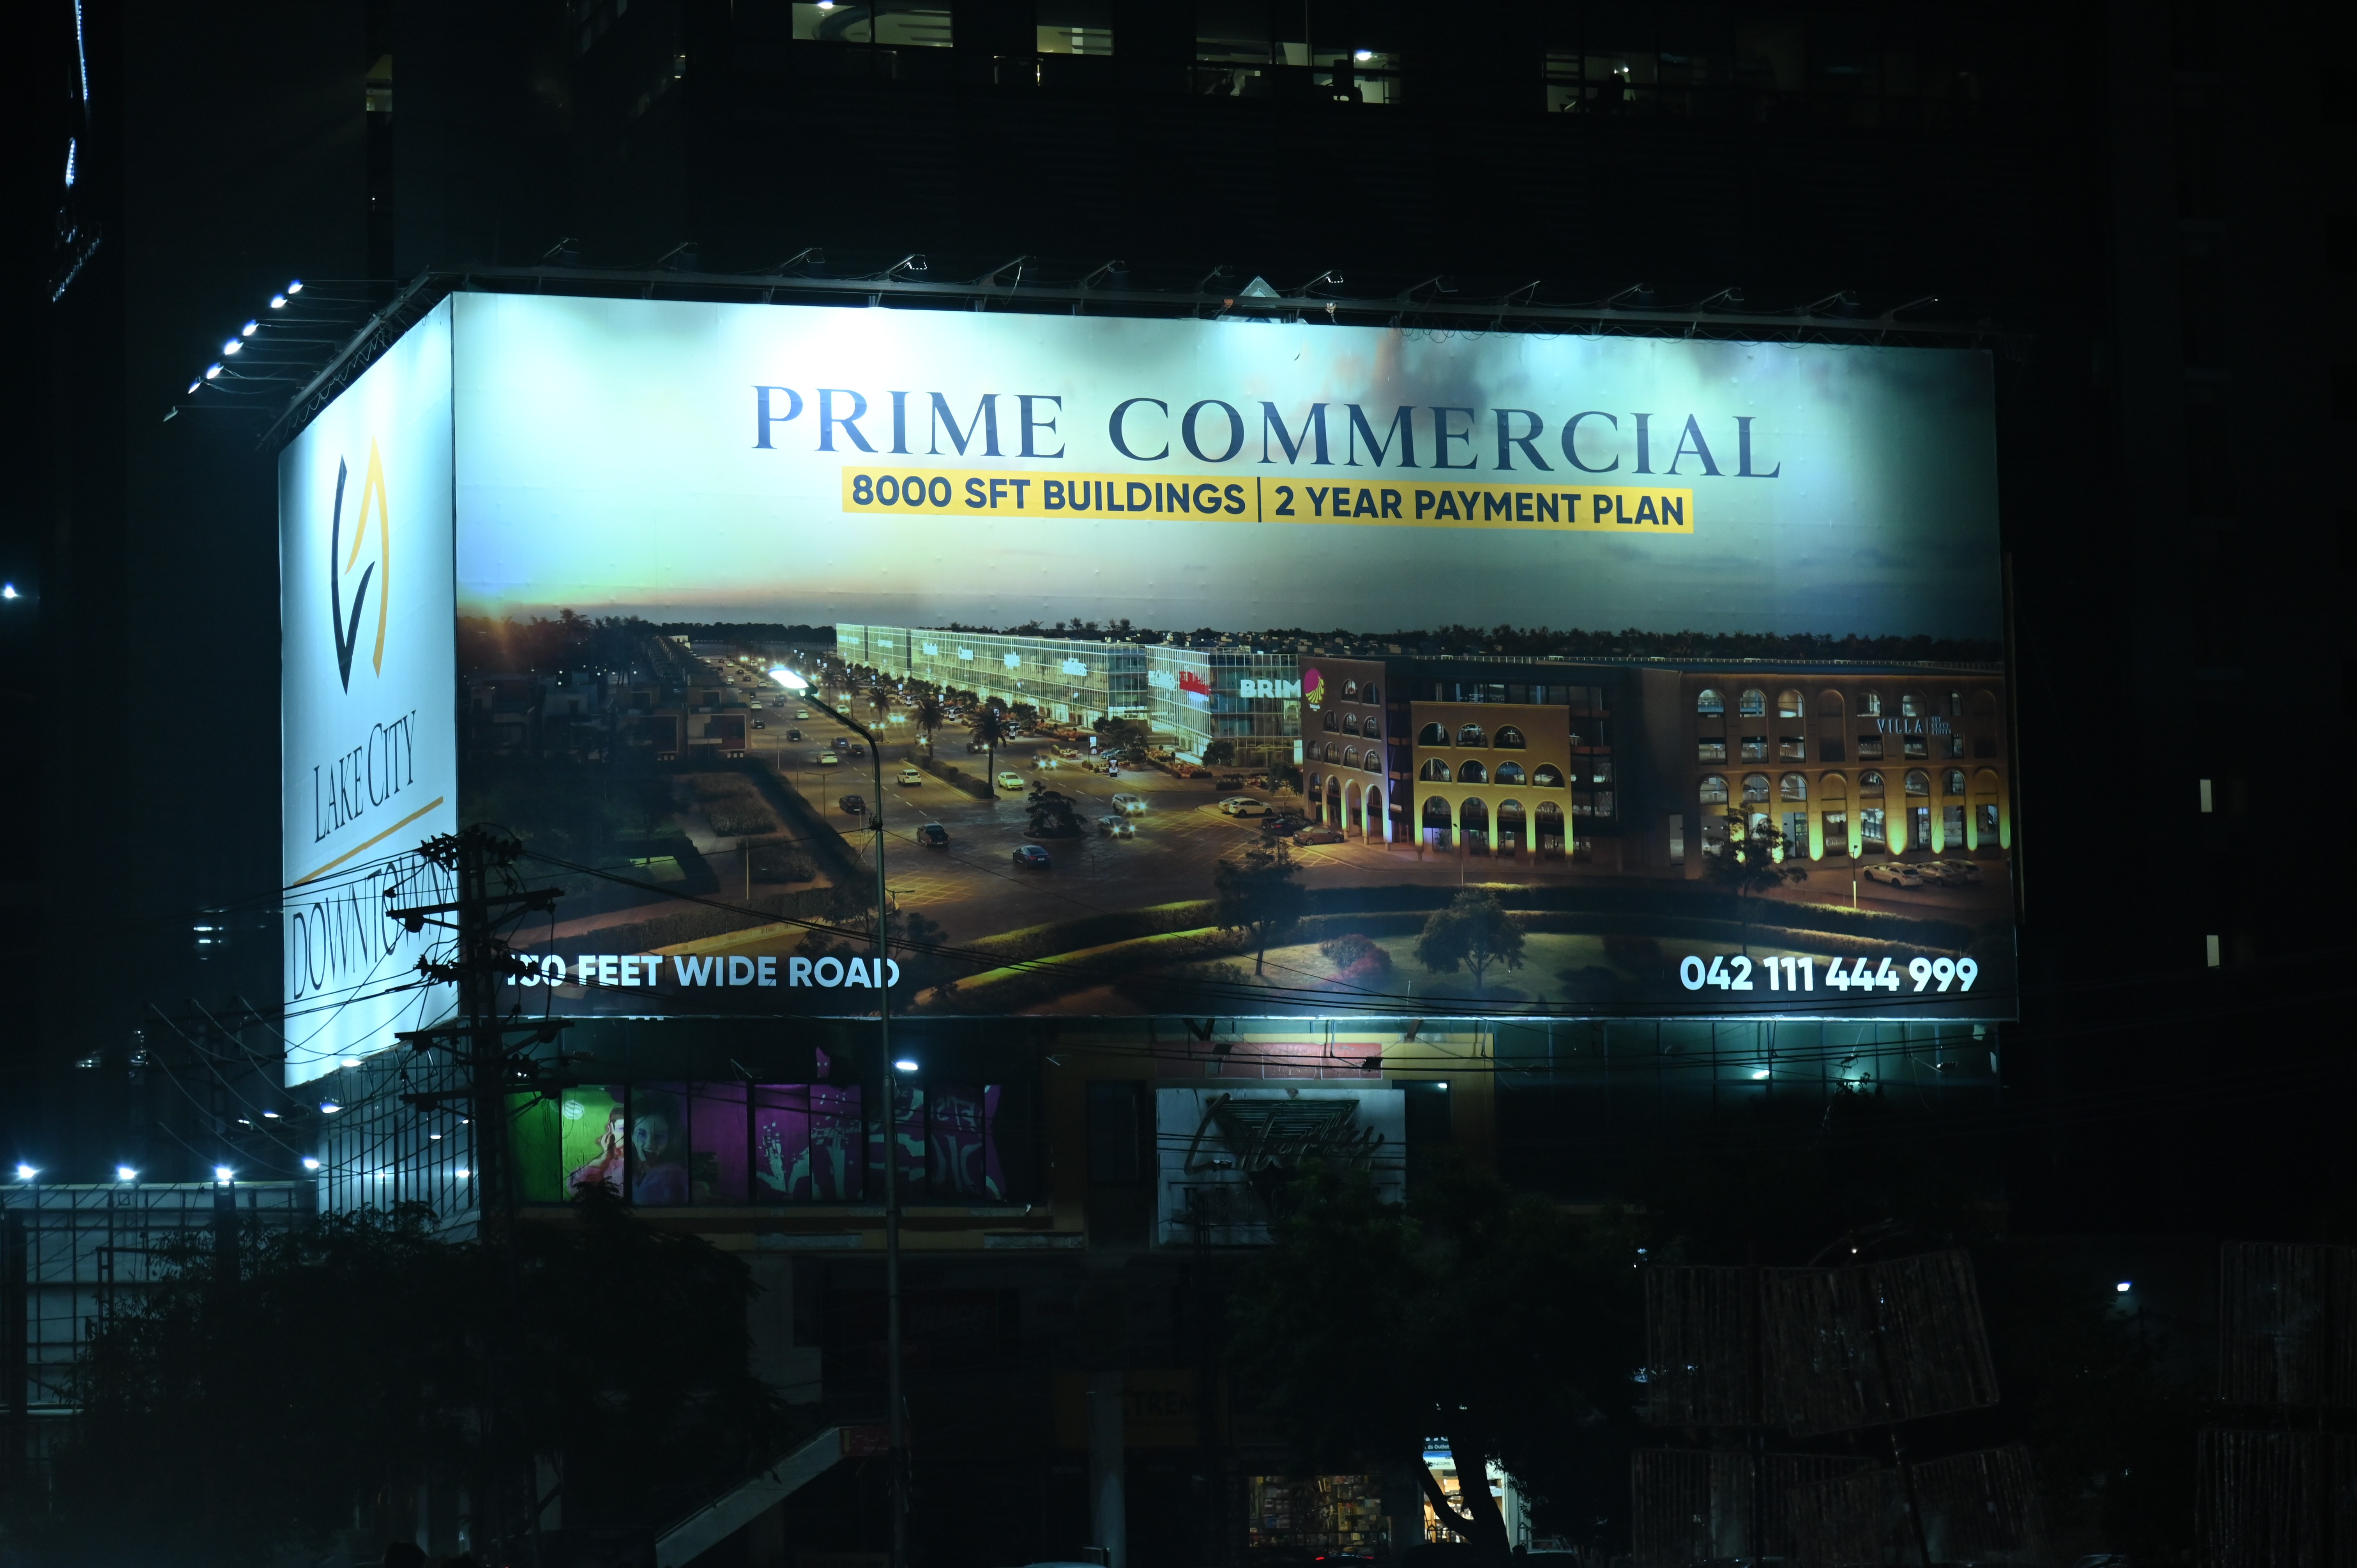 The banner of the commercial building